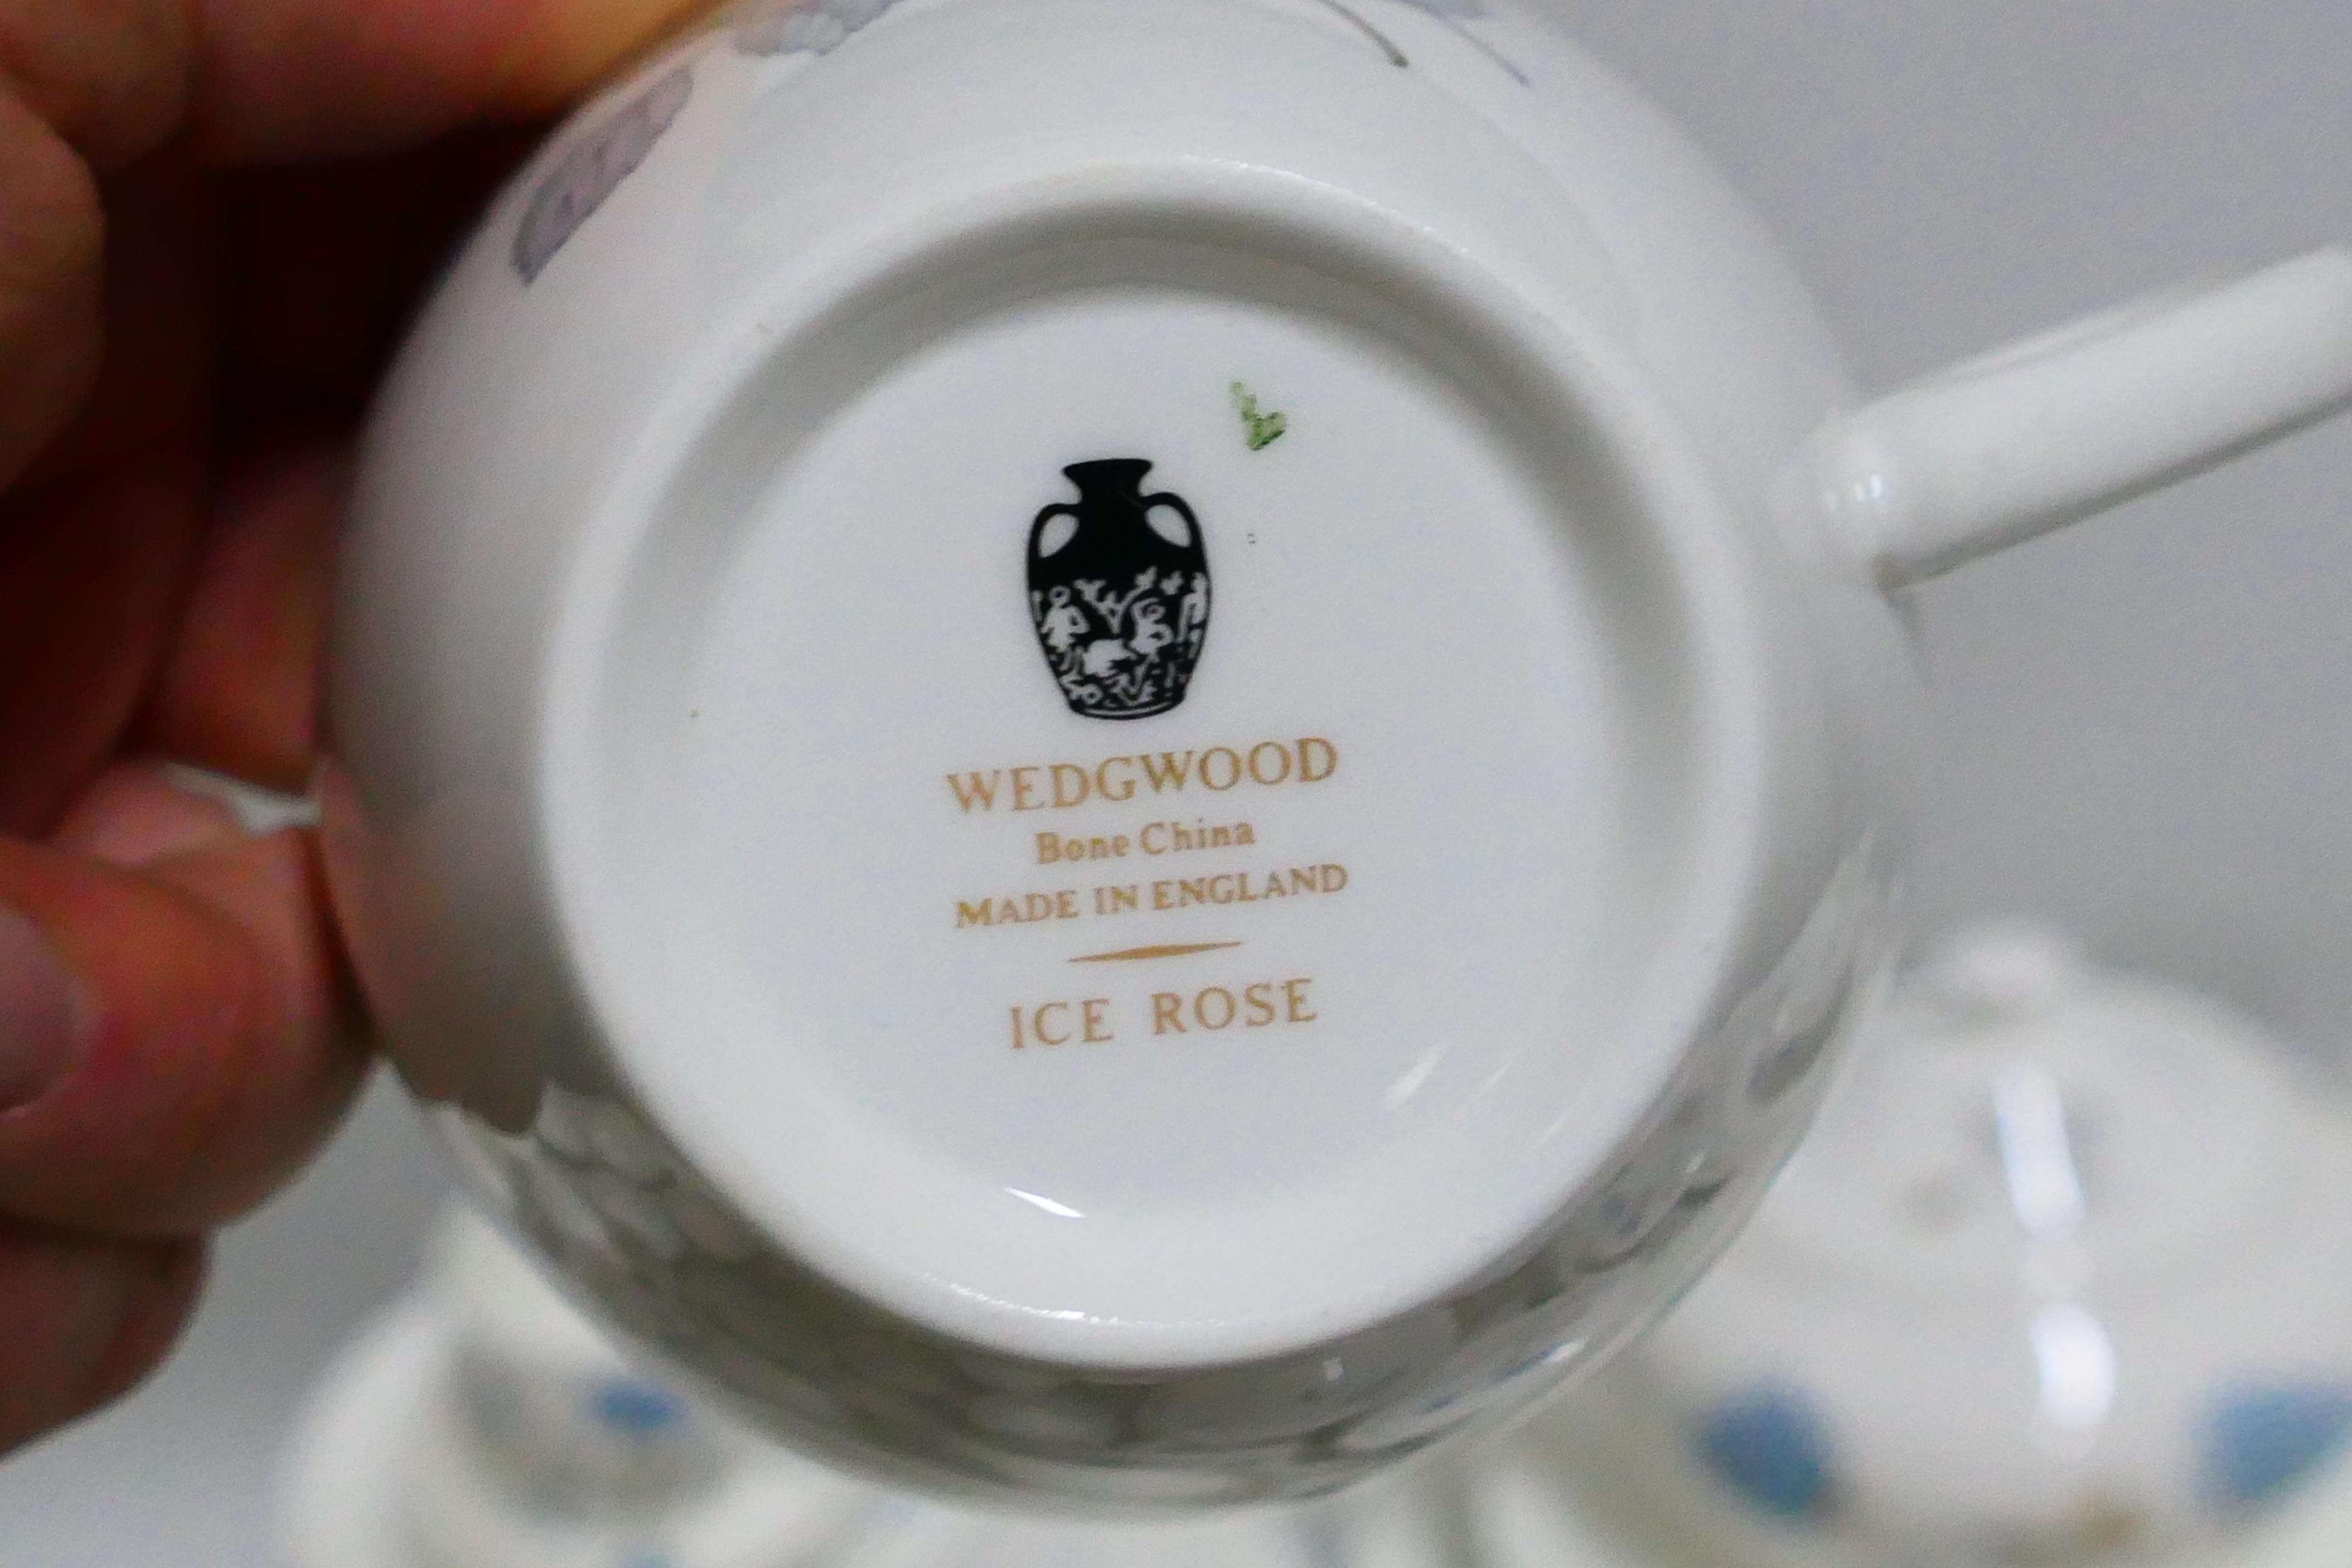 Wedgwood - A large Wedgwood Ice Rose dinner/tea set - Pieces include soup bowls, cream jugs, - Image 10 of 10